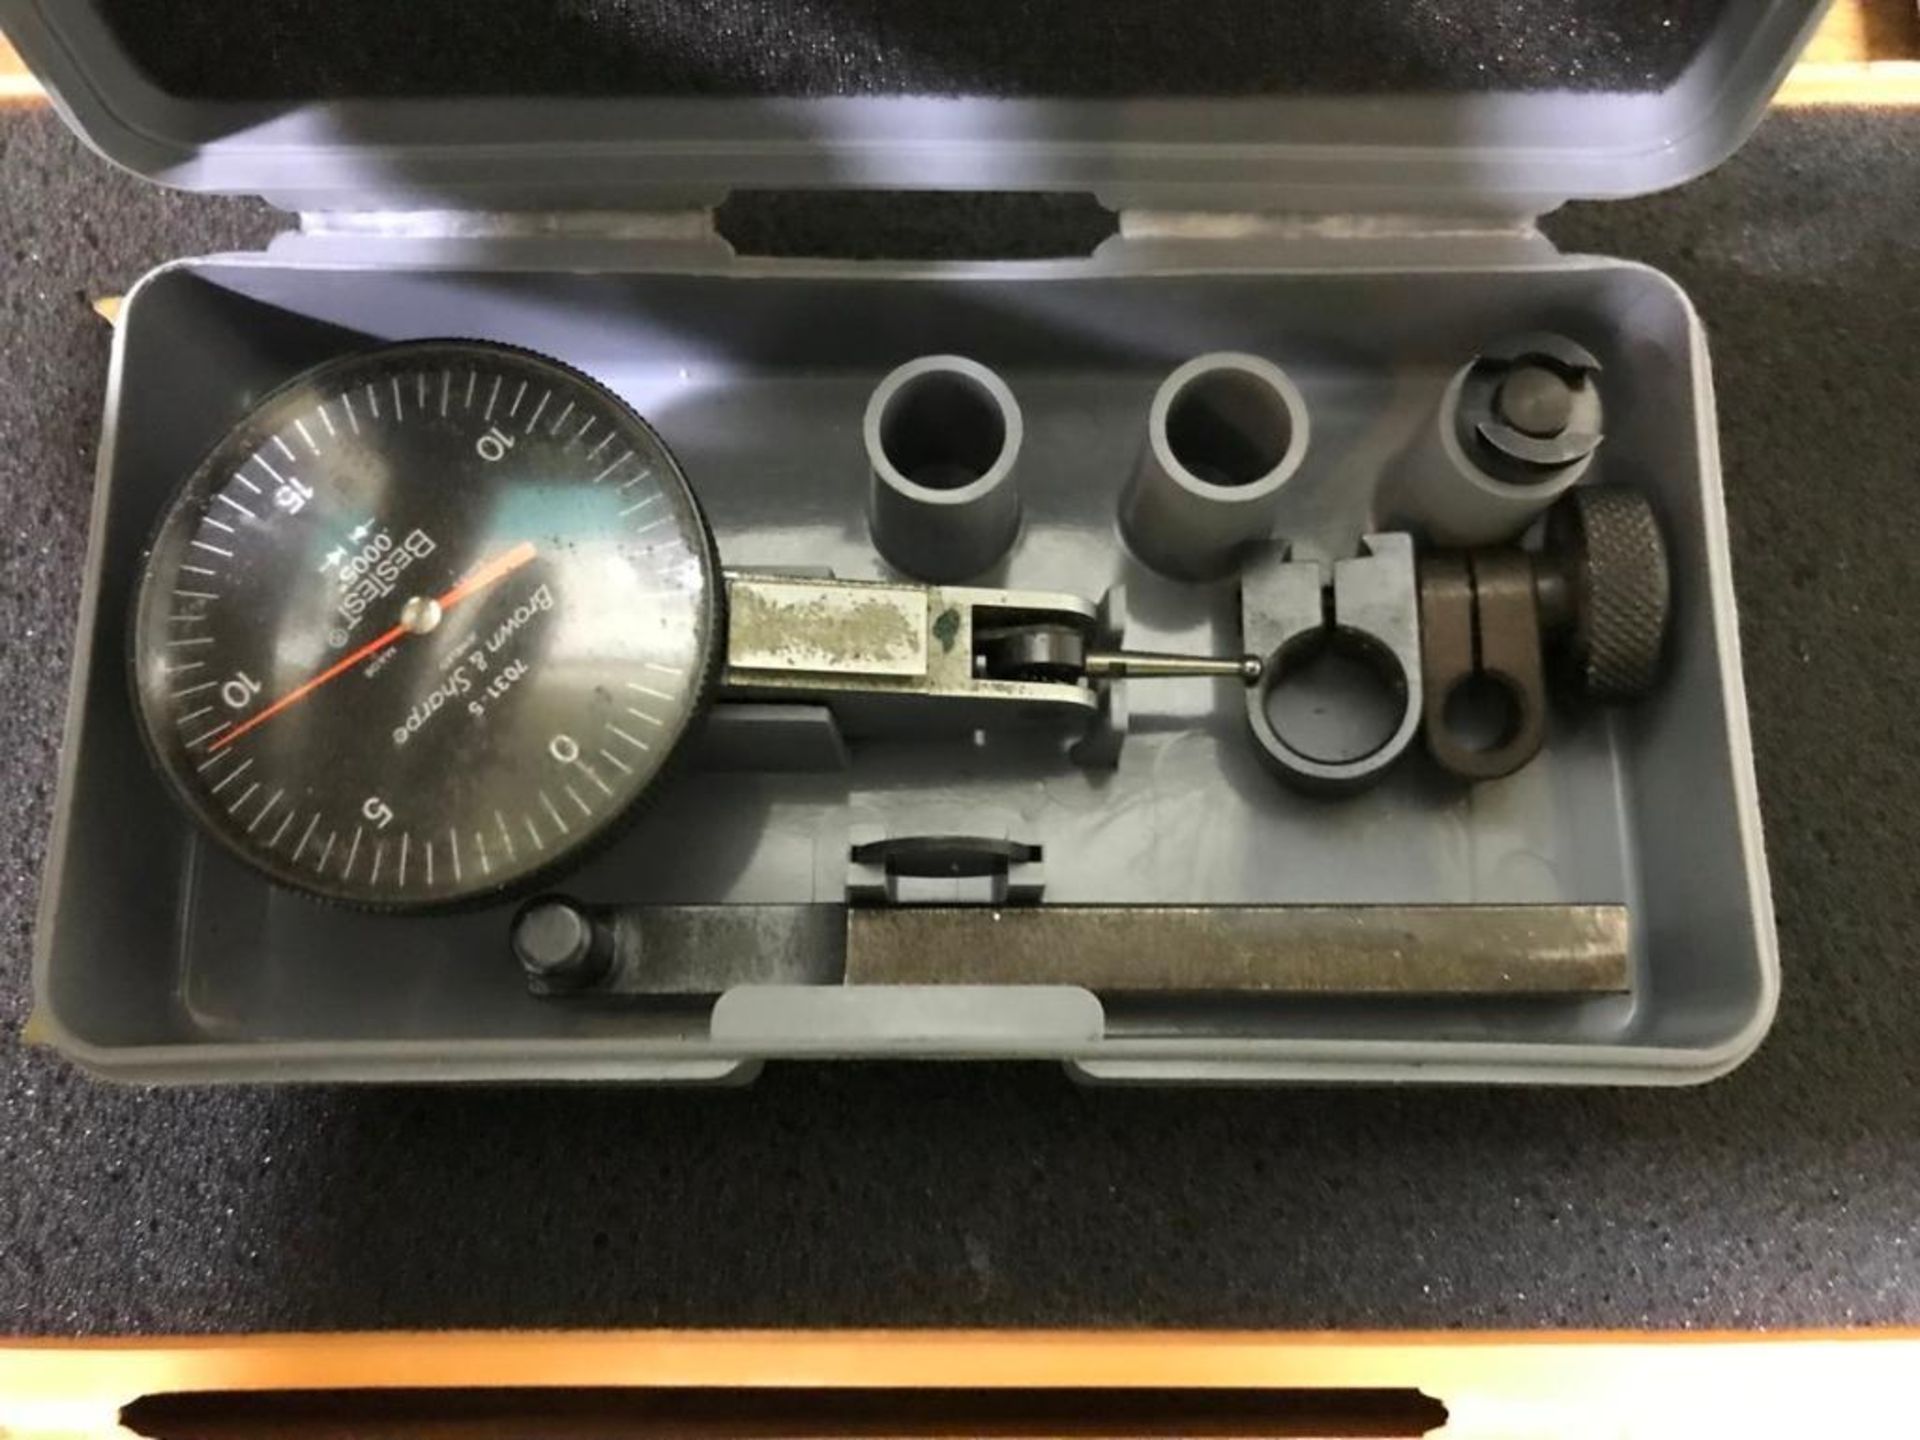 Mitutoyo, Blade Micrometer Ranging From (0-1'') - Image 3 of 3